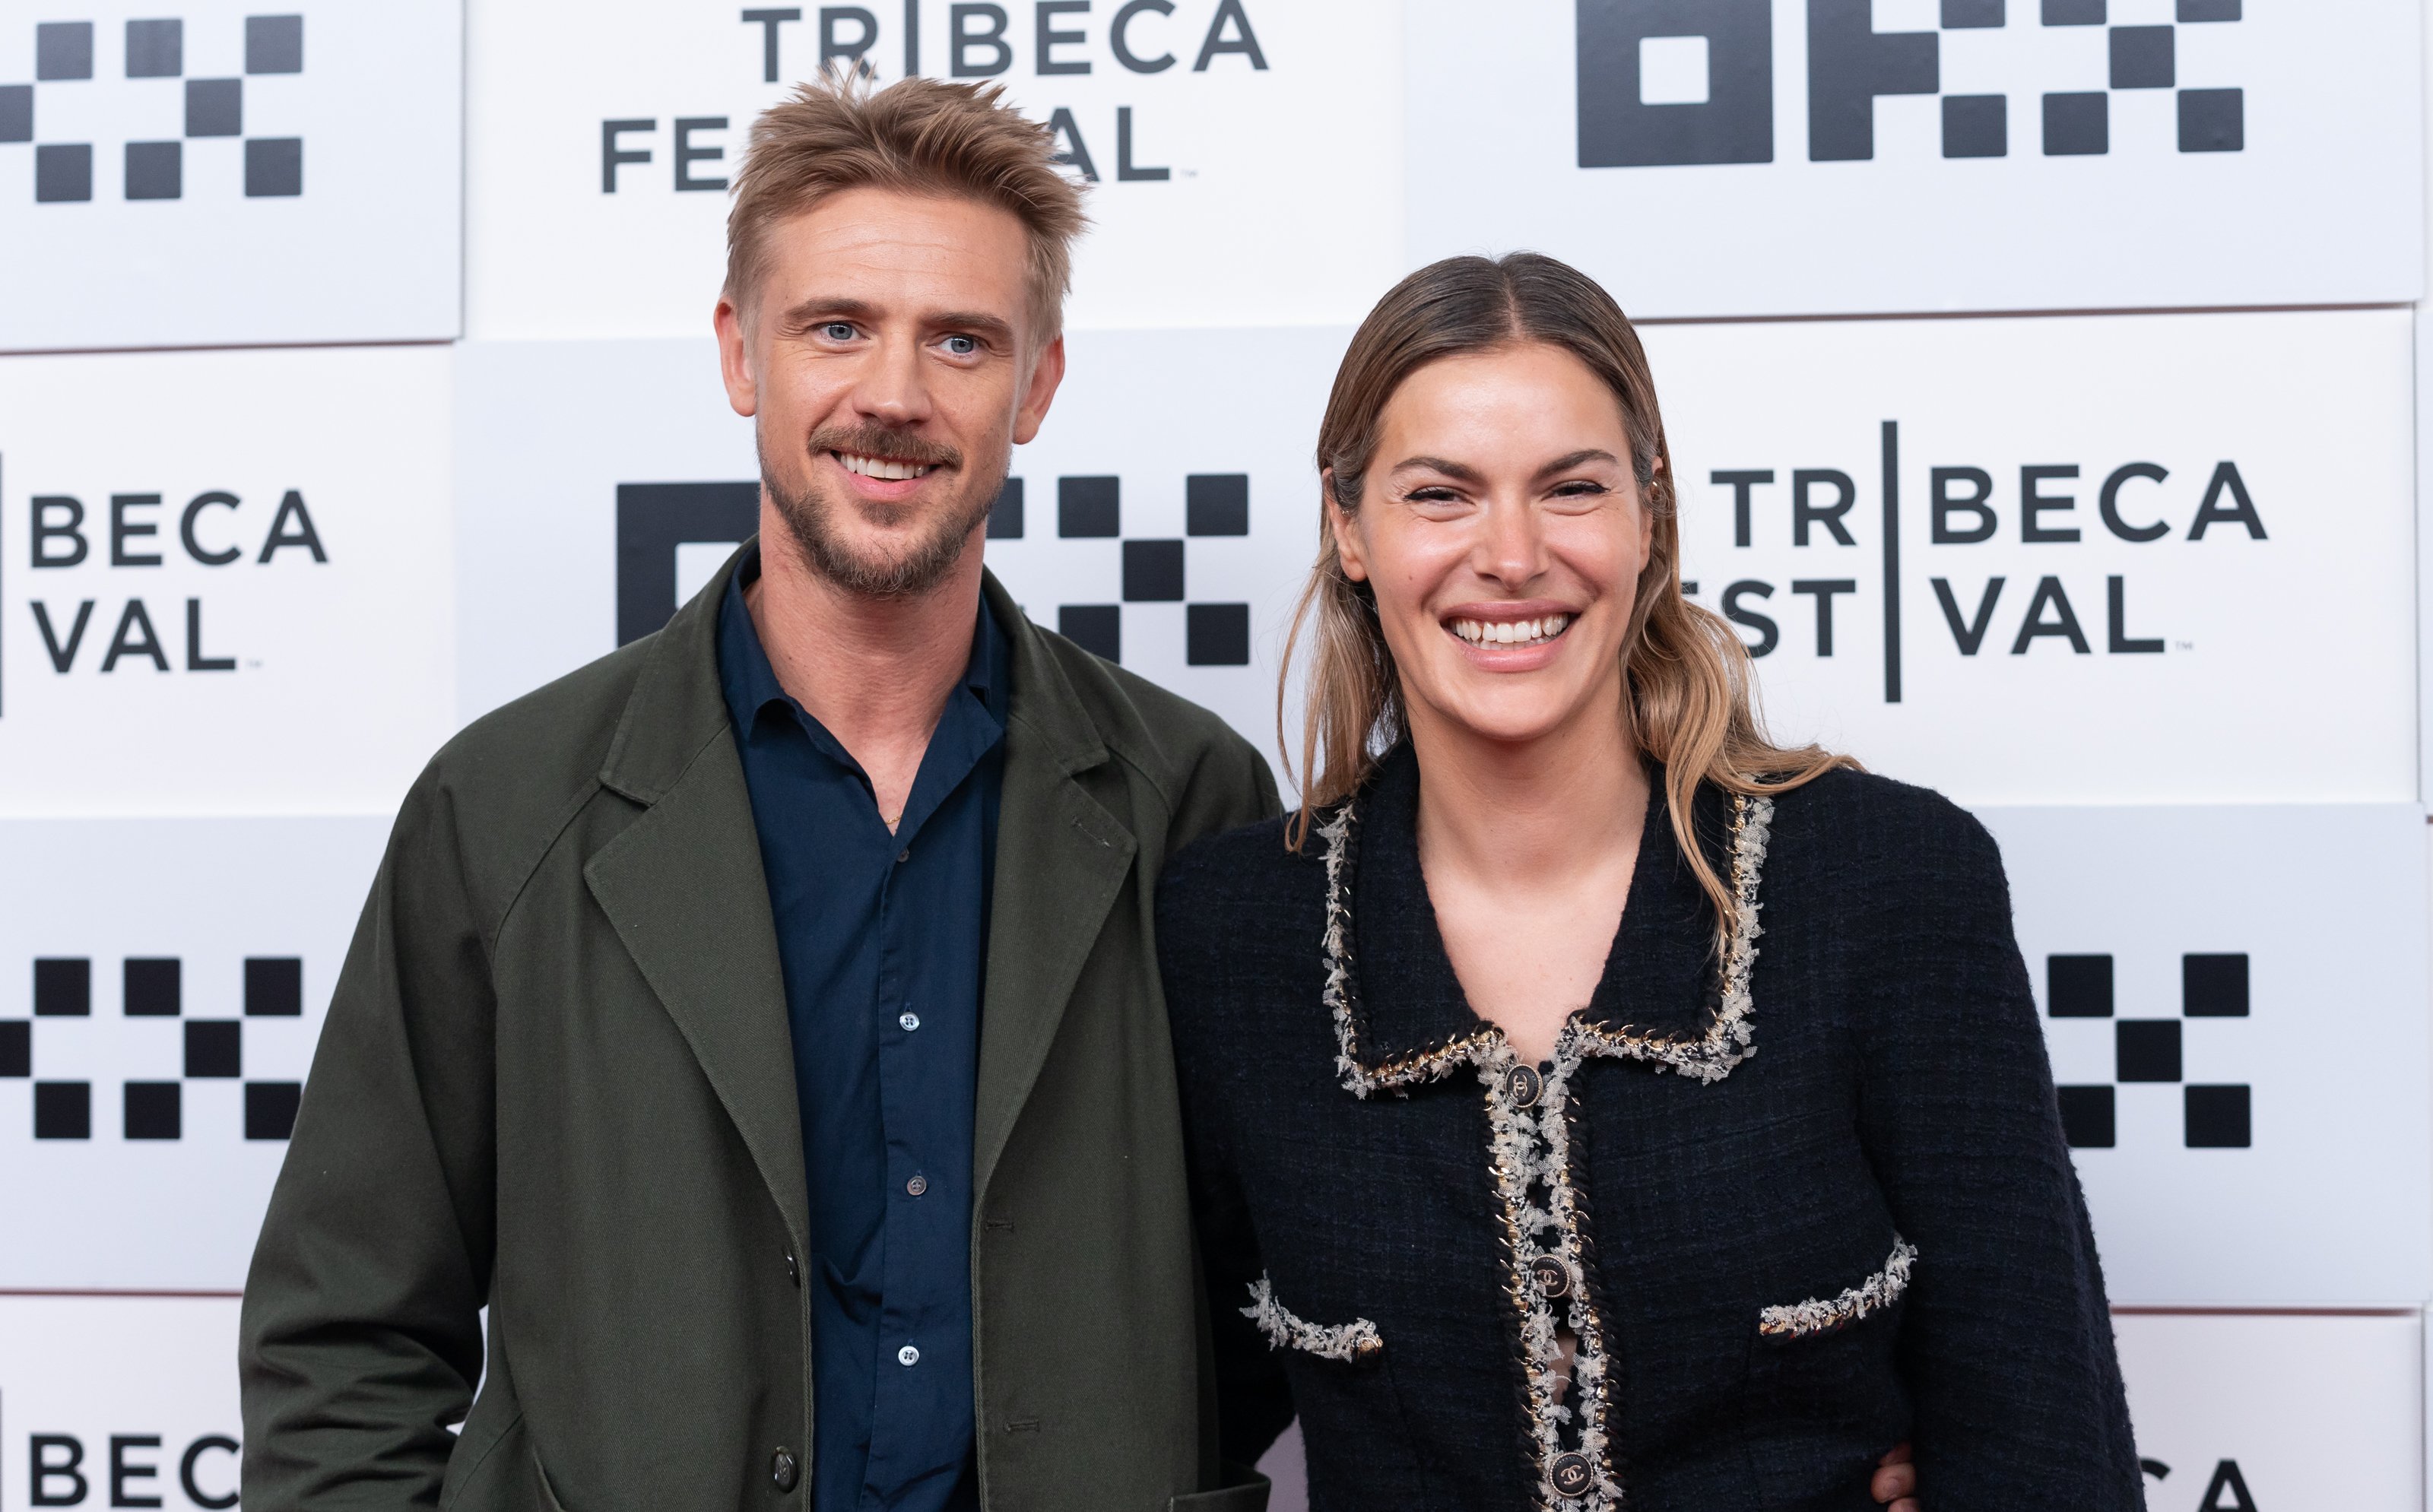 Actors Boyd Holbrook and Tatiana Pajkovic at BMCC Tribeca PAC on June 12, 2022, in New York City. | Source: Getty Images